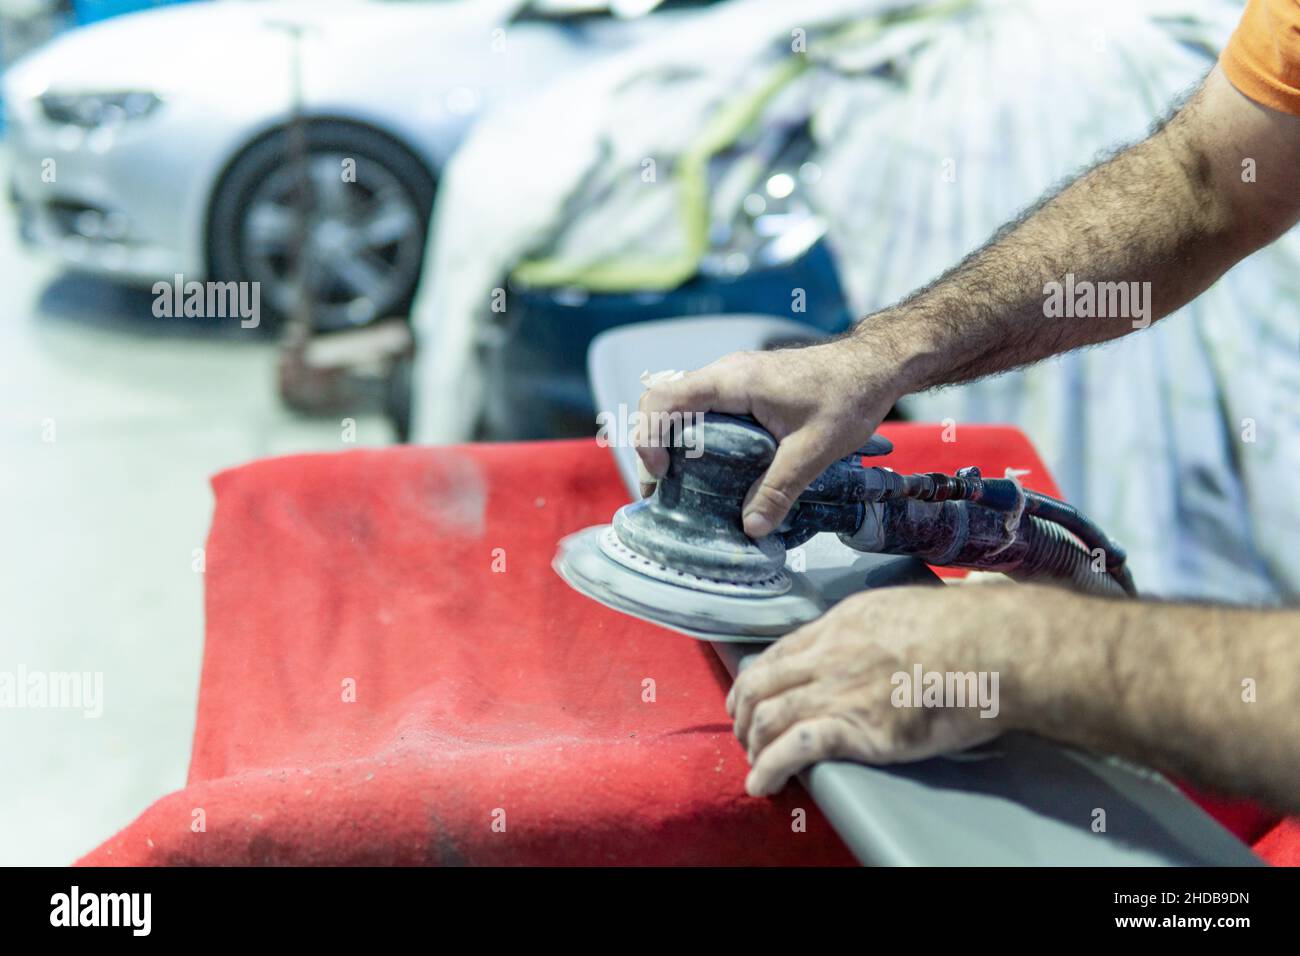 Auto mechanic sanding a part of a car in a garage. Preparing for painting the car in a workshop. Blurry movement Stock Photo